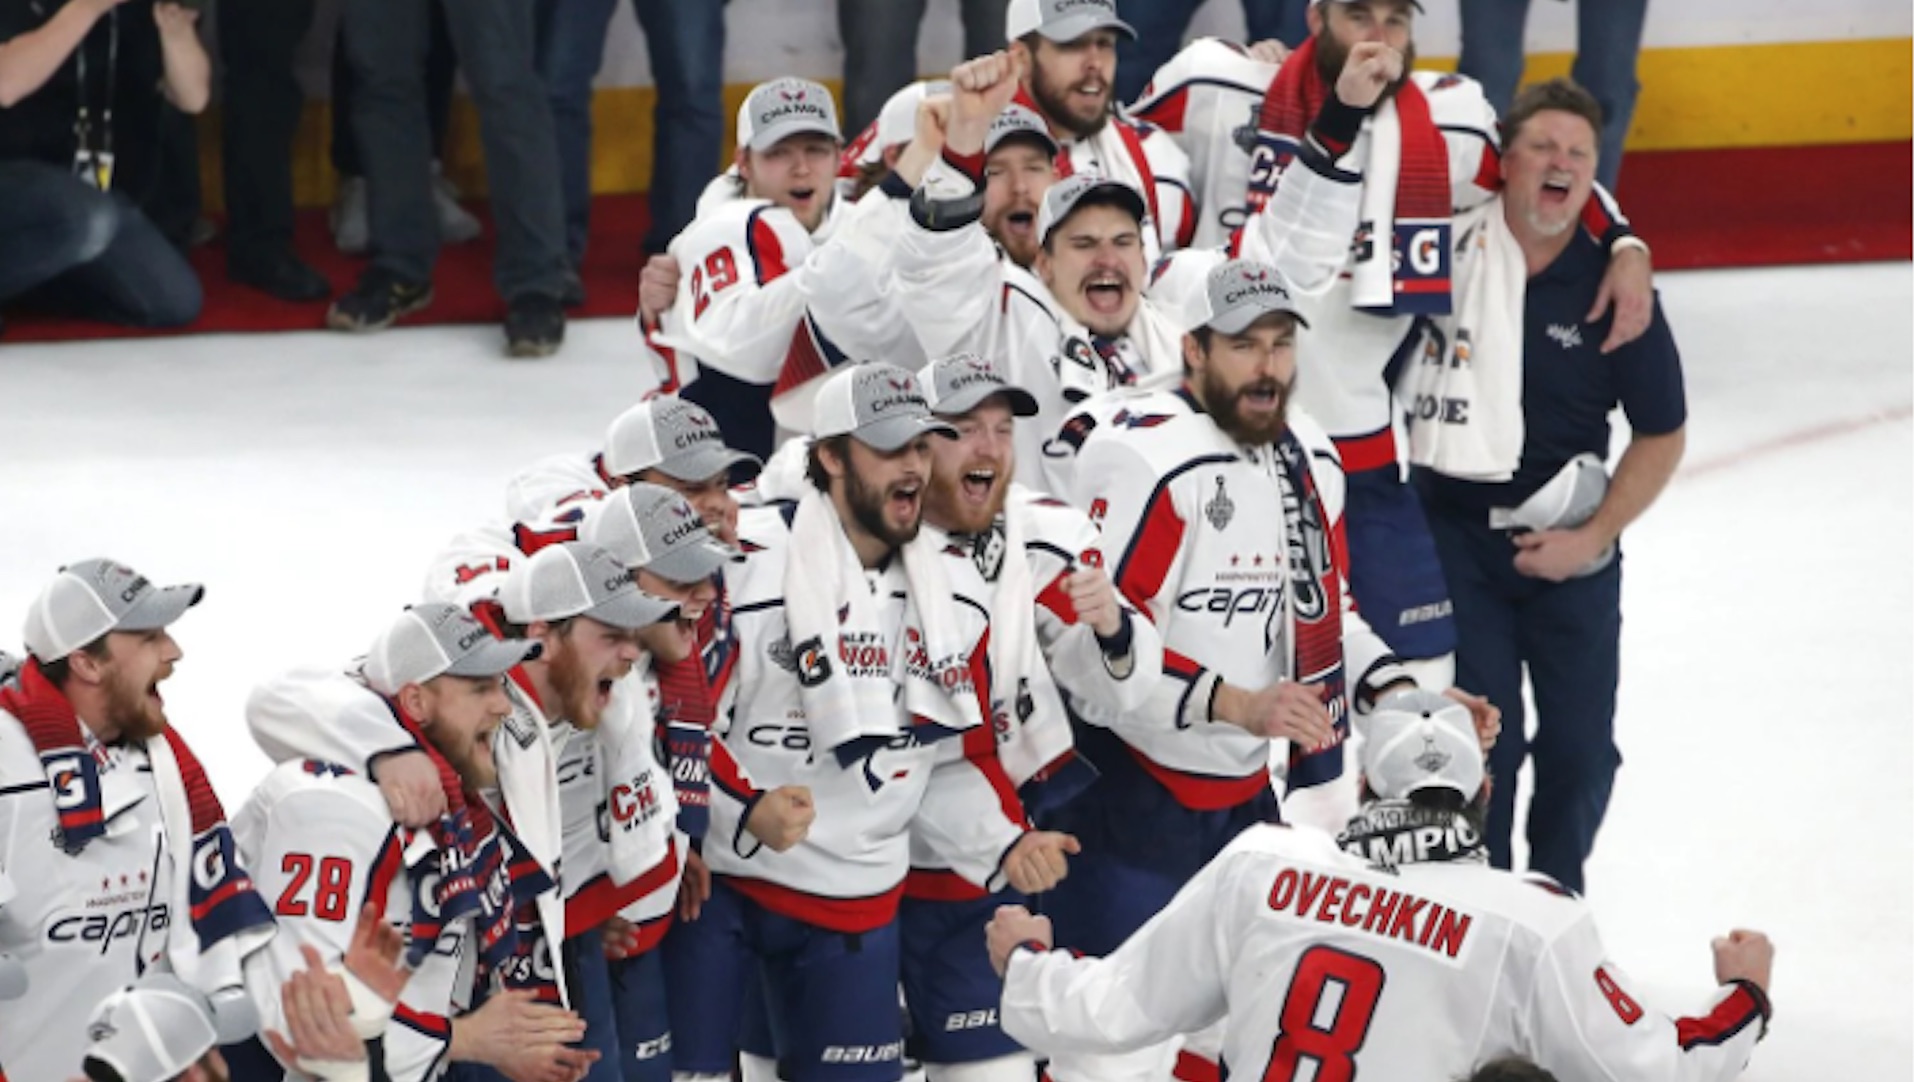 DuClaw is releasing a new beer called Cup Stand. It's inspired by the  Capitals' Stanley Cup championship.